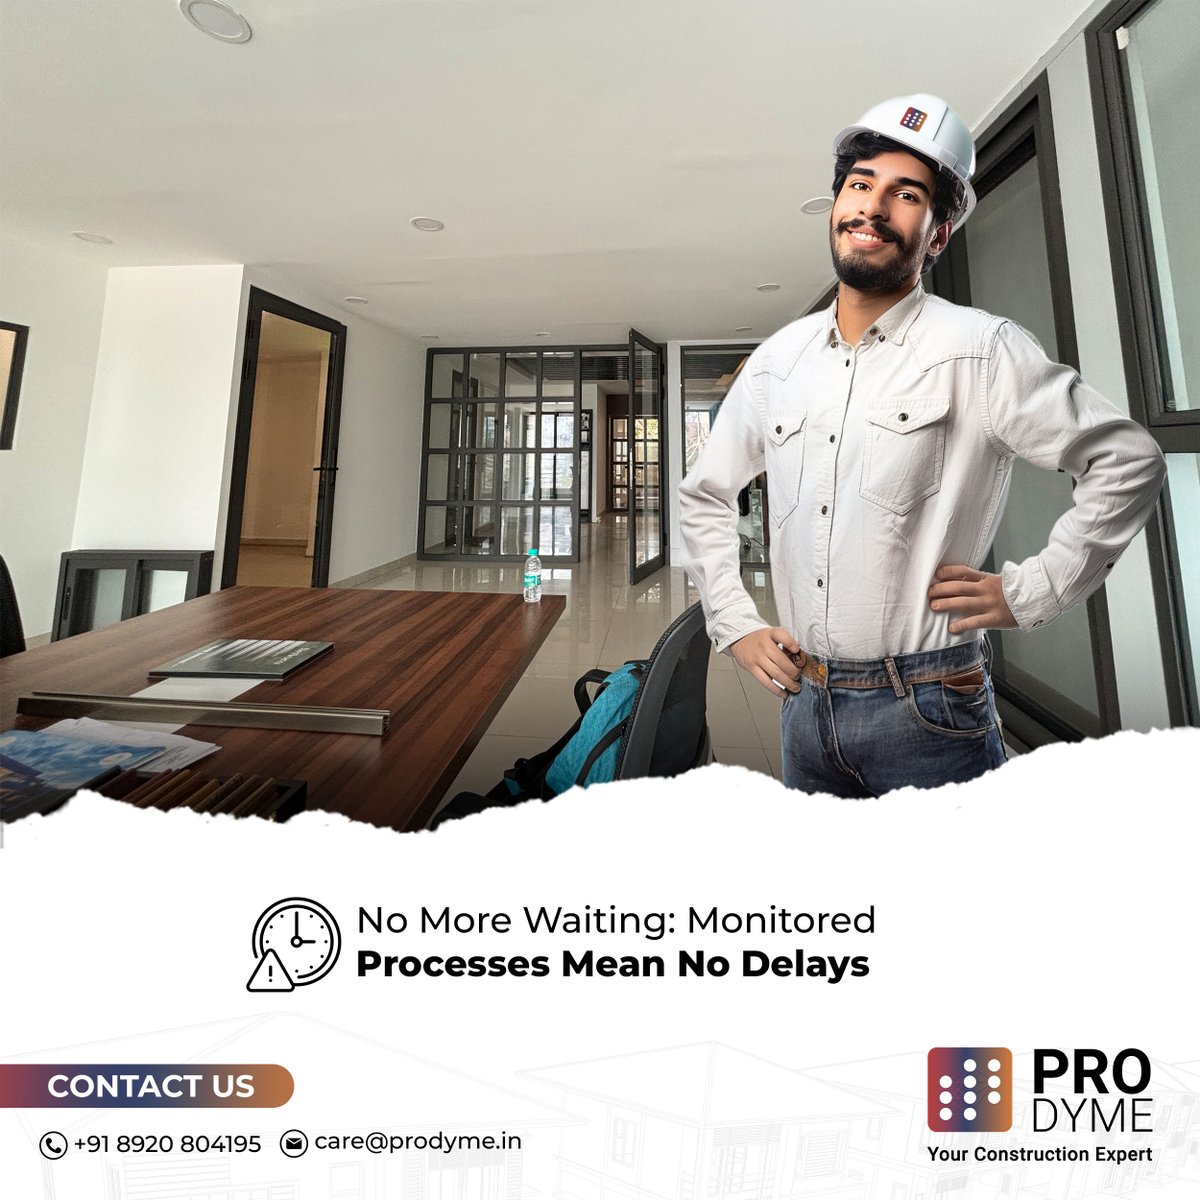 With Prodyme, your dream home becomes a swift reality - no delays, just precise monitoring.

Contact Us Today!

Call- +91-8920804195
care@prodyme.in
.
#HomeConstruction #HomeRenovation #HomeBuilders #DreamHome #Construction #Renovation #HomeInterior #ModernHomes #ProdymeHomes